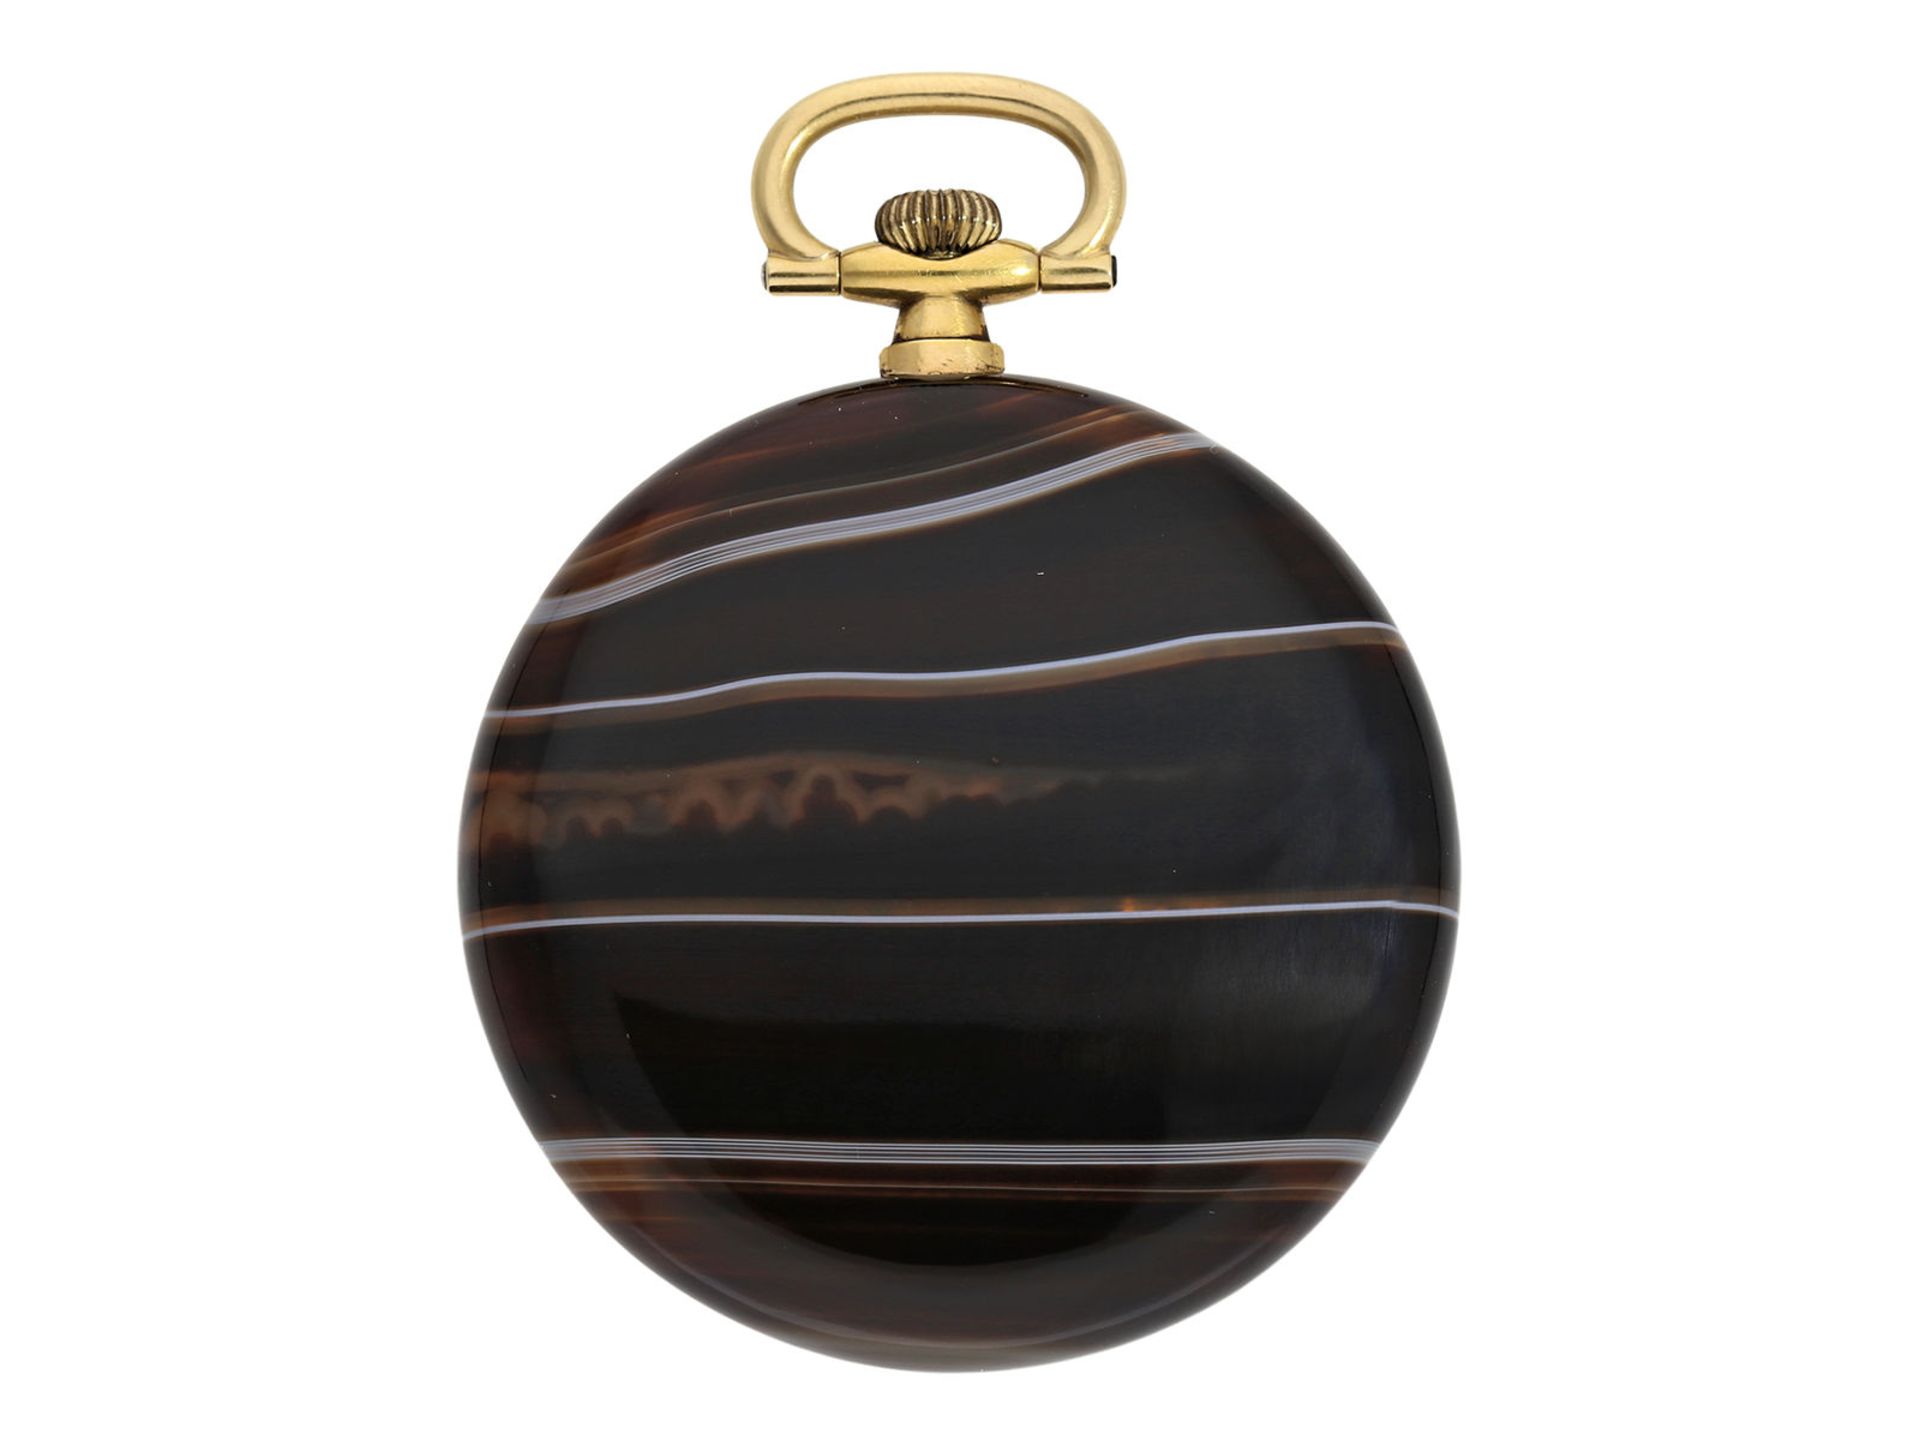 Pocket watch: Art déco dress watch in rare agate gold case, ca. 1925 - Image 2 of 3